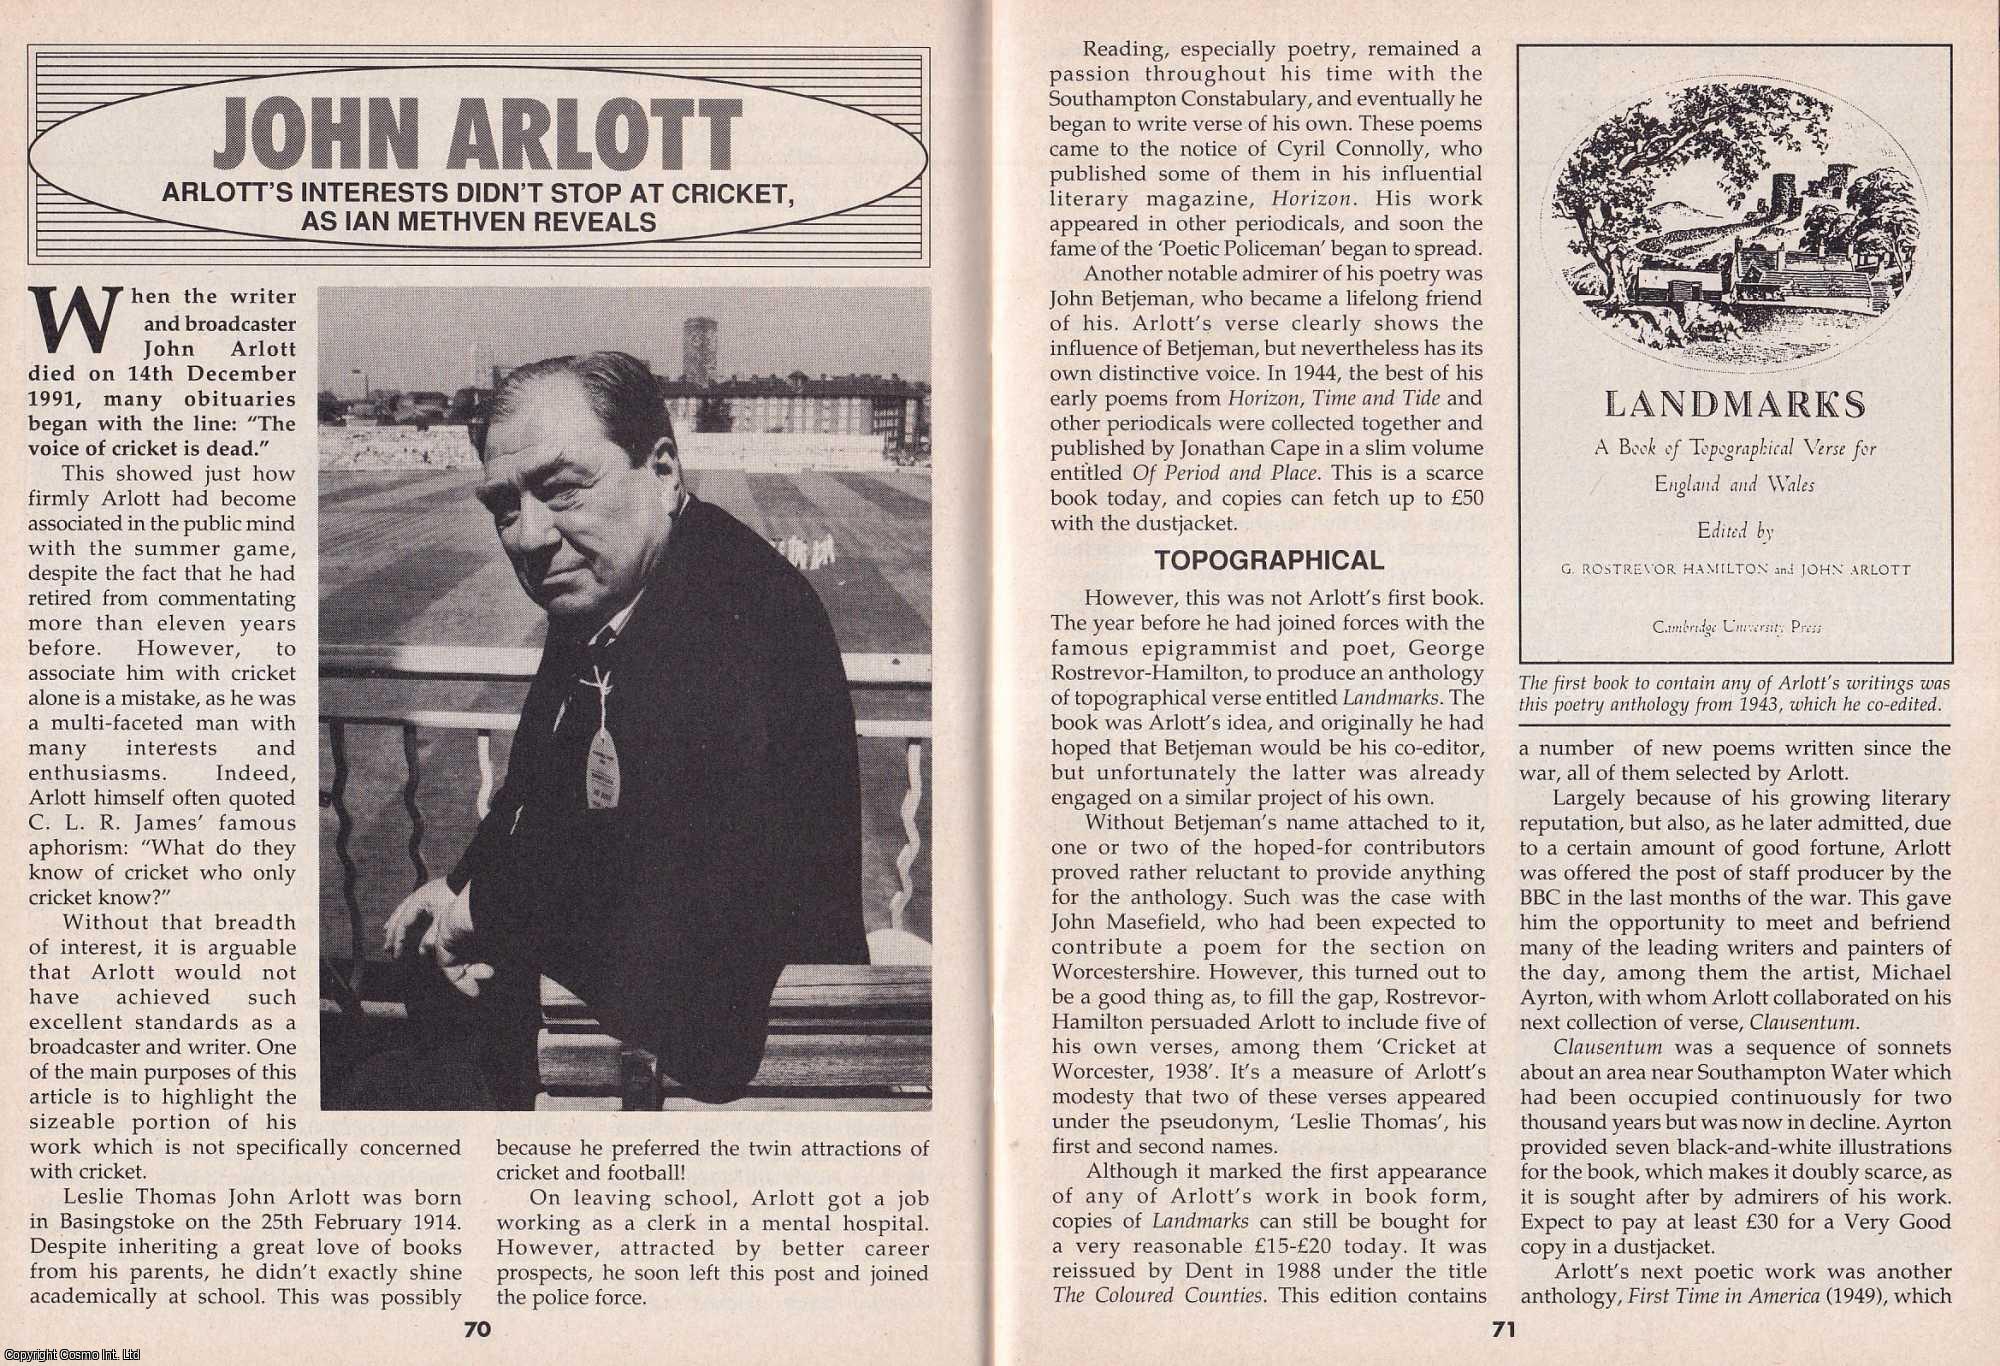 Ian Methven - John Arlott. Arlott's Interests Didn't Stop at Cricket. This is an original article separated from an issue of The Book & Magazine Collector publication.